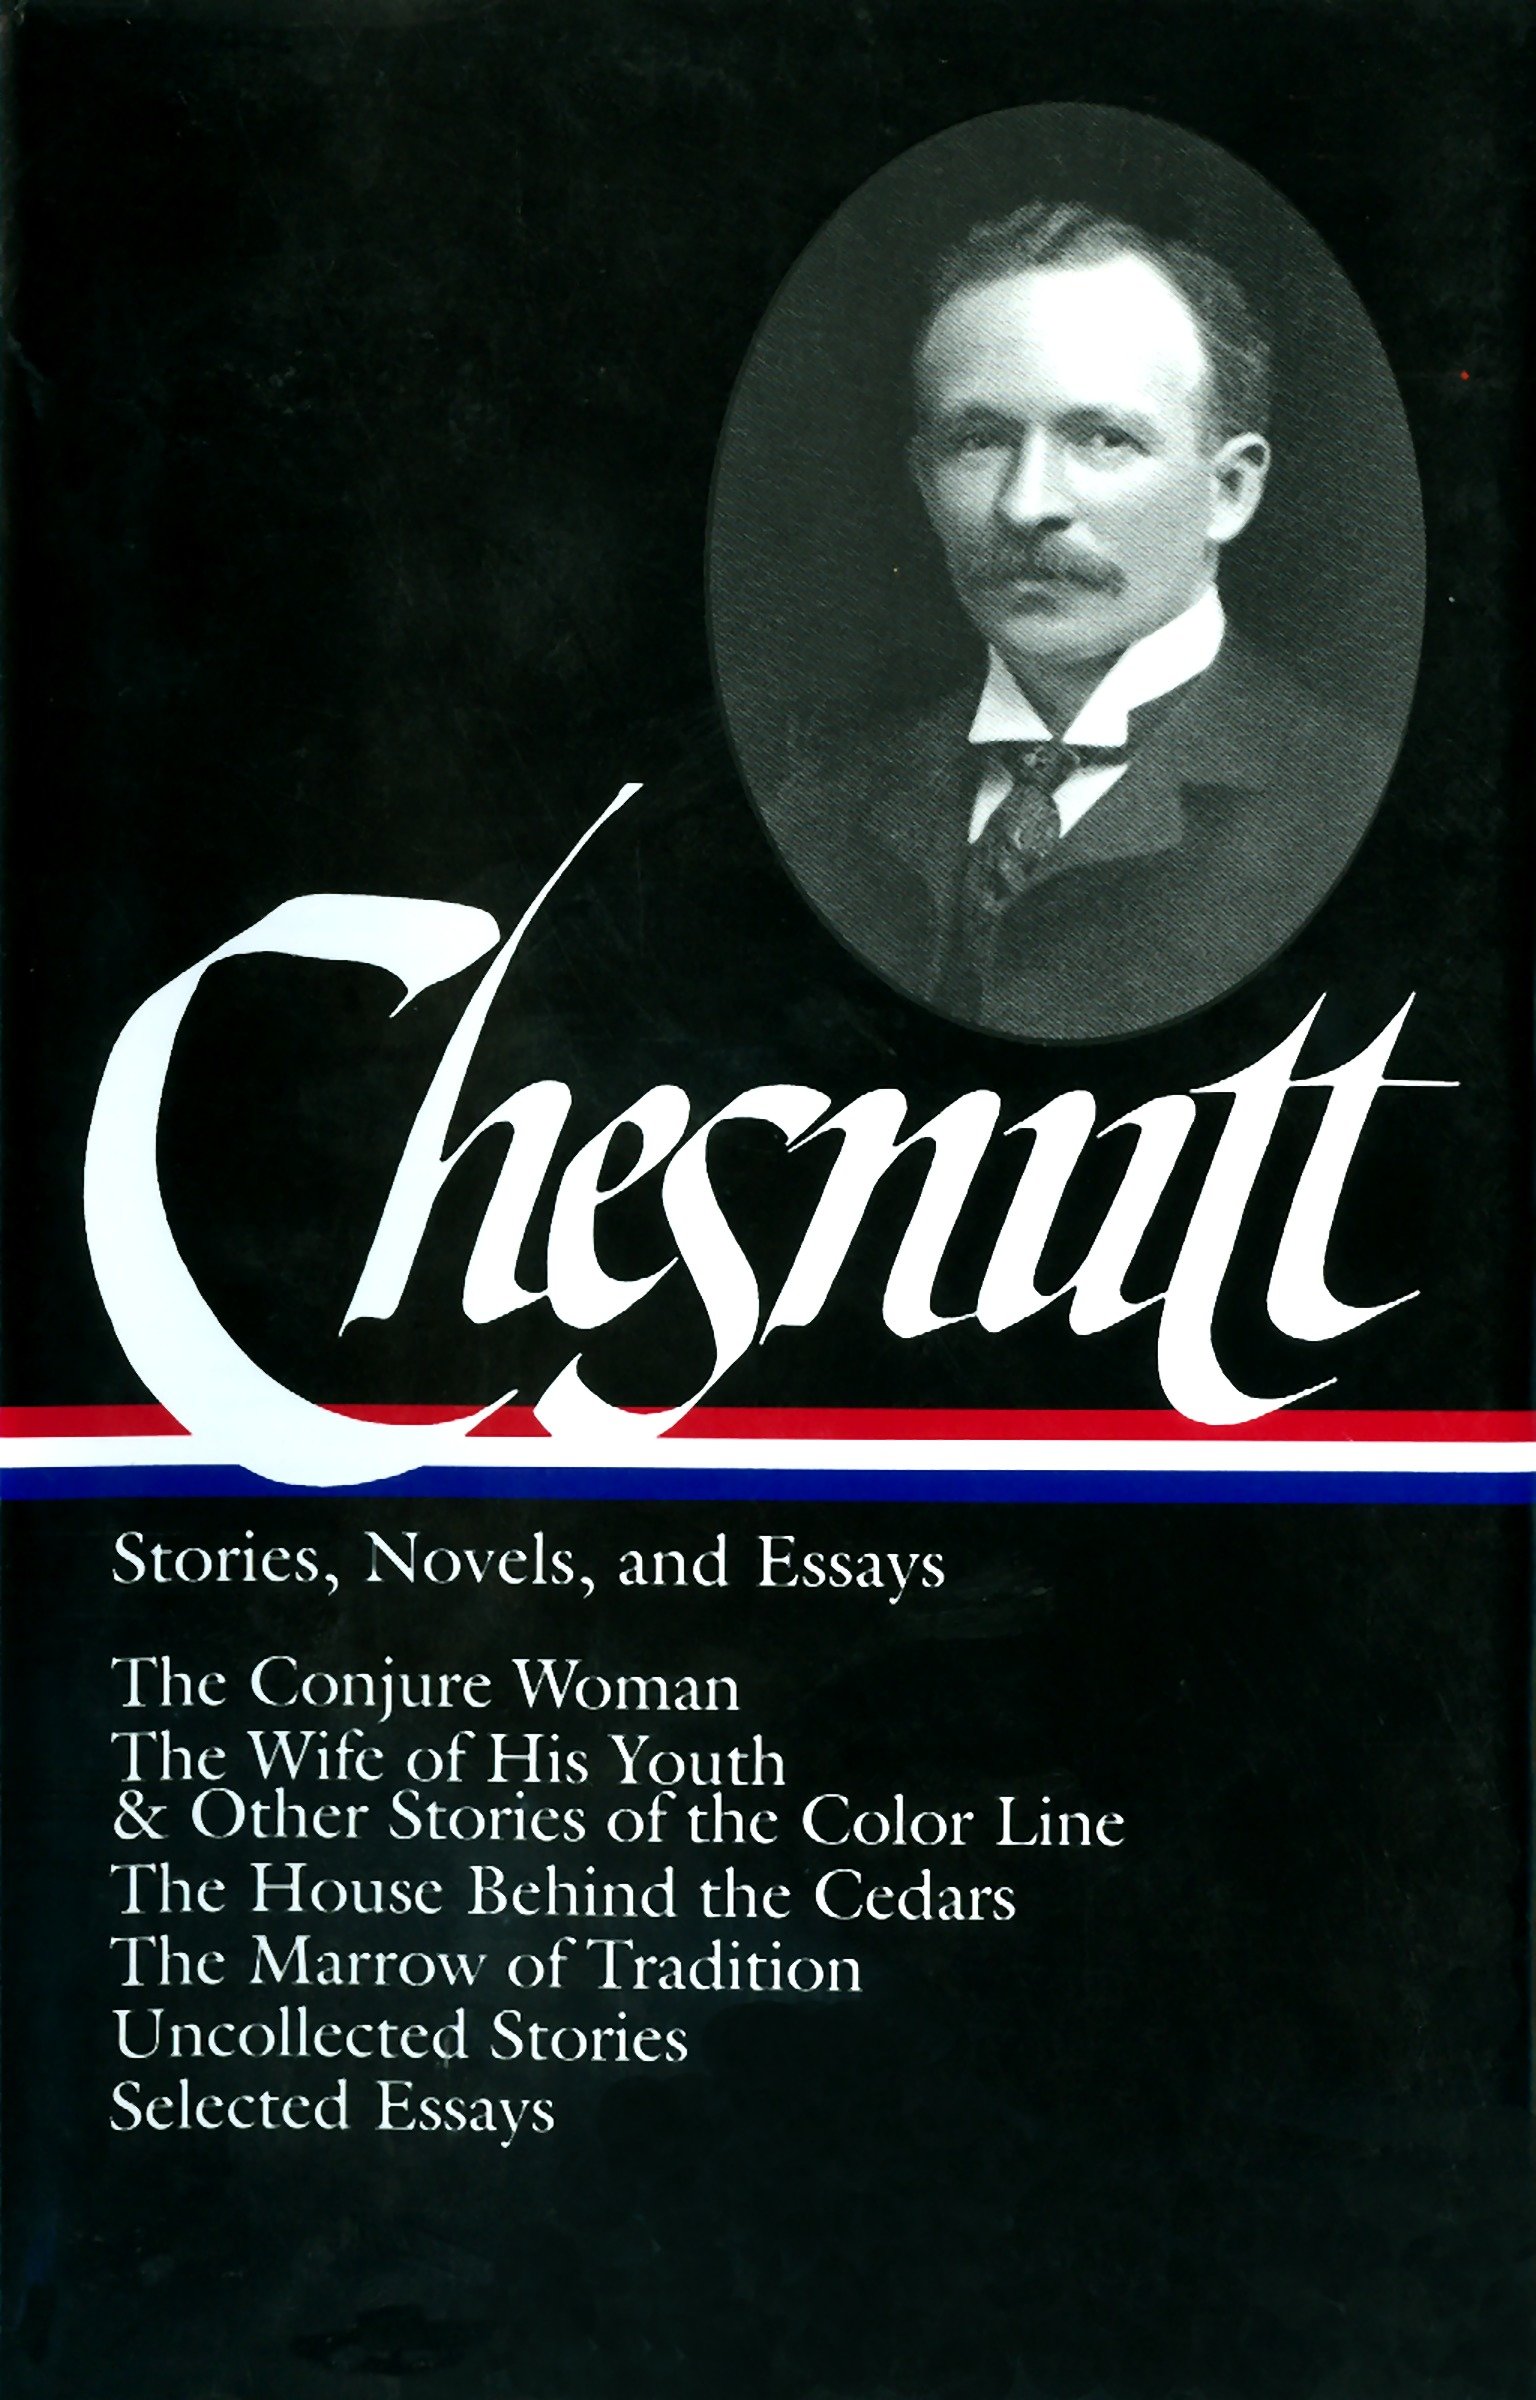 Charles W. Chesnutt: Stories, Novels, And Essays (Loa #131) (Hardcover Book)